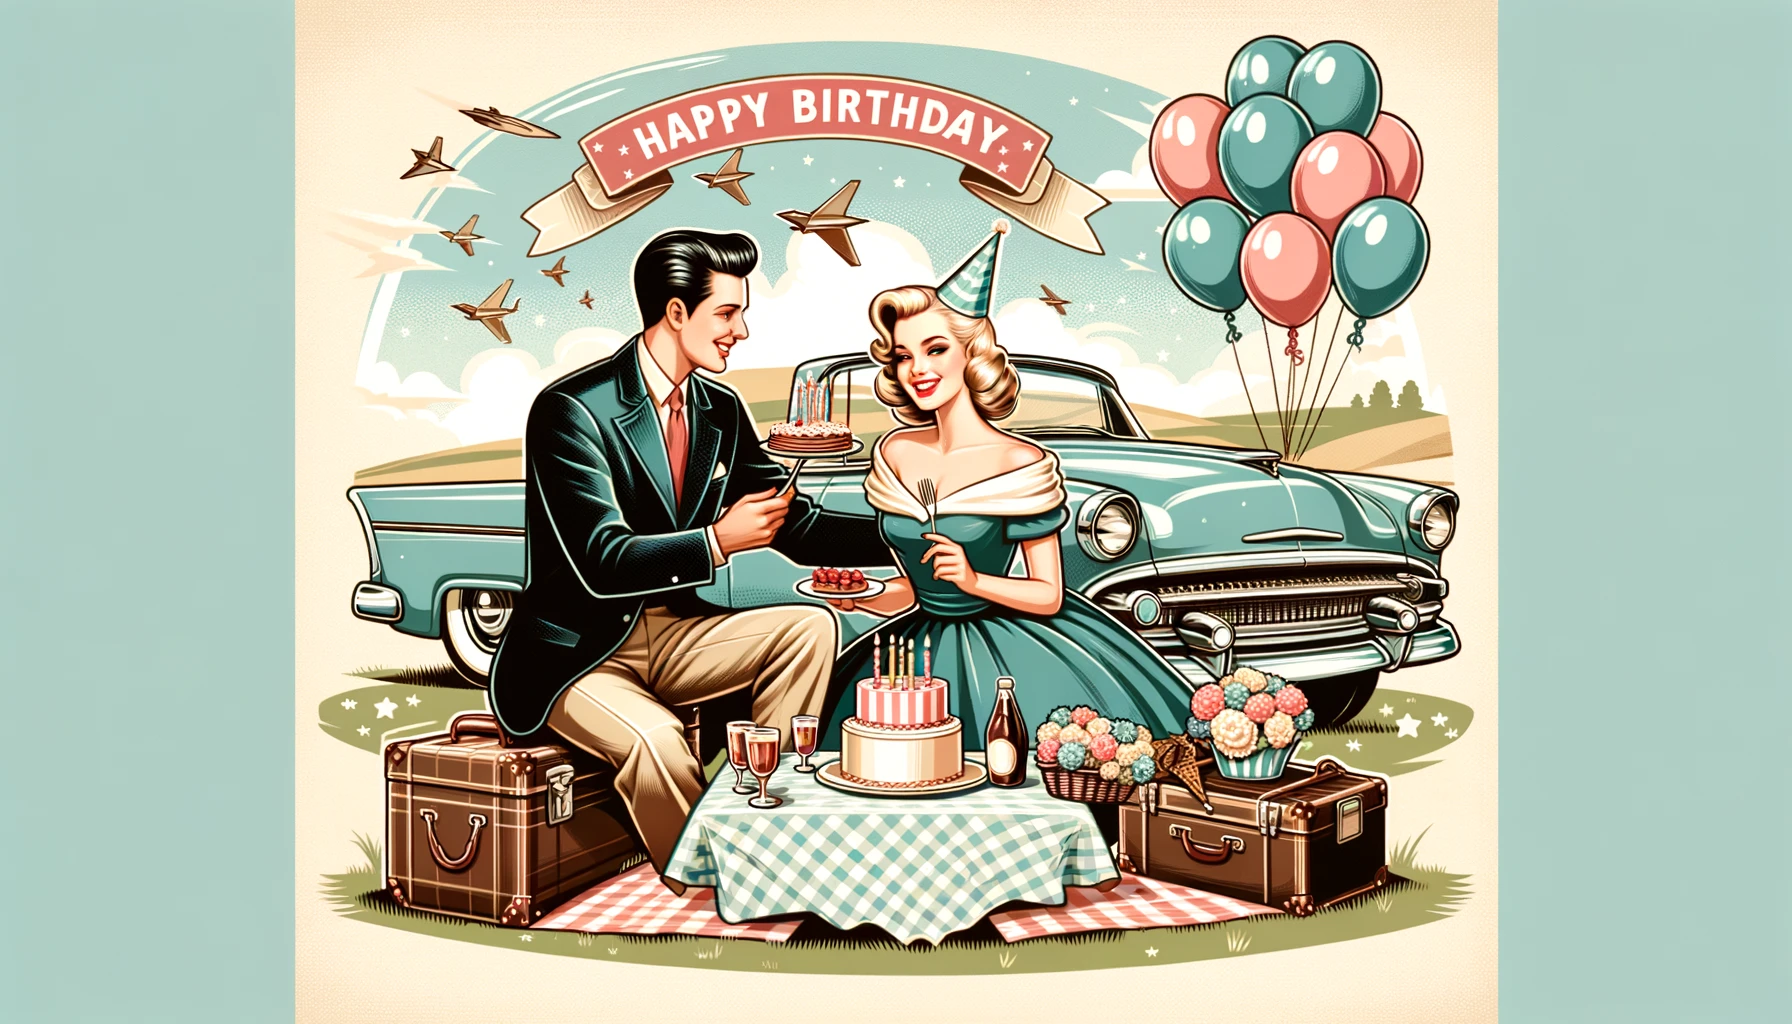 Poetic Birthday Wishes for a Woman from a Man